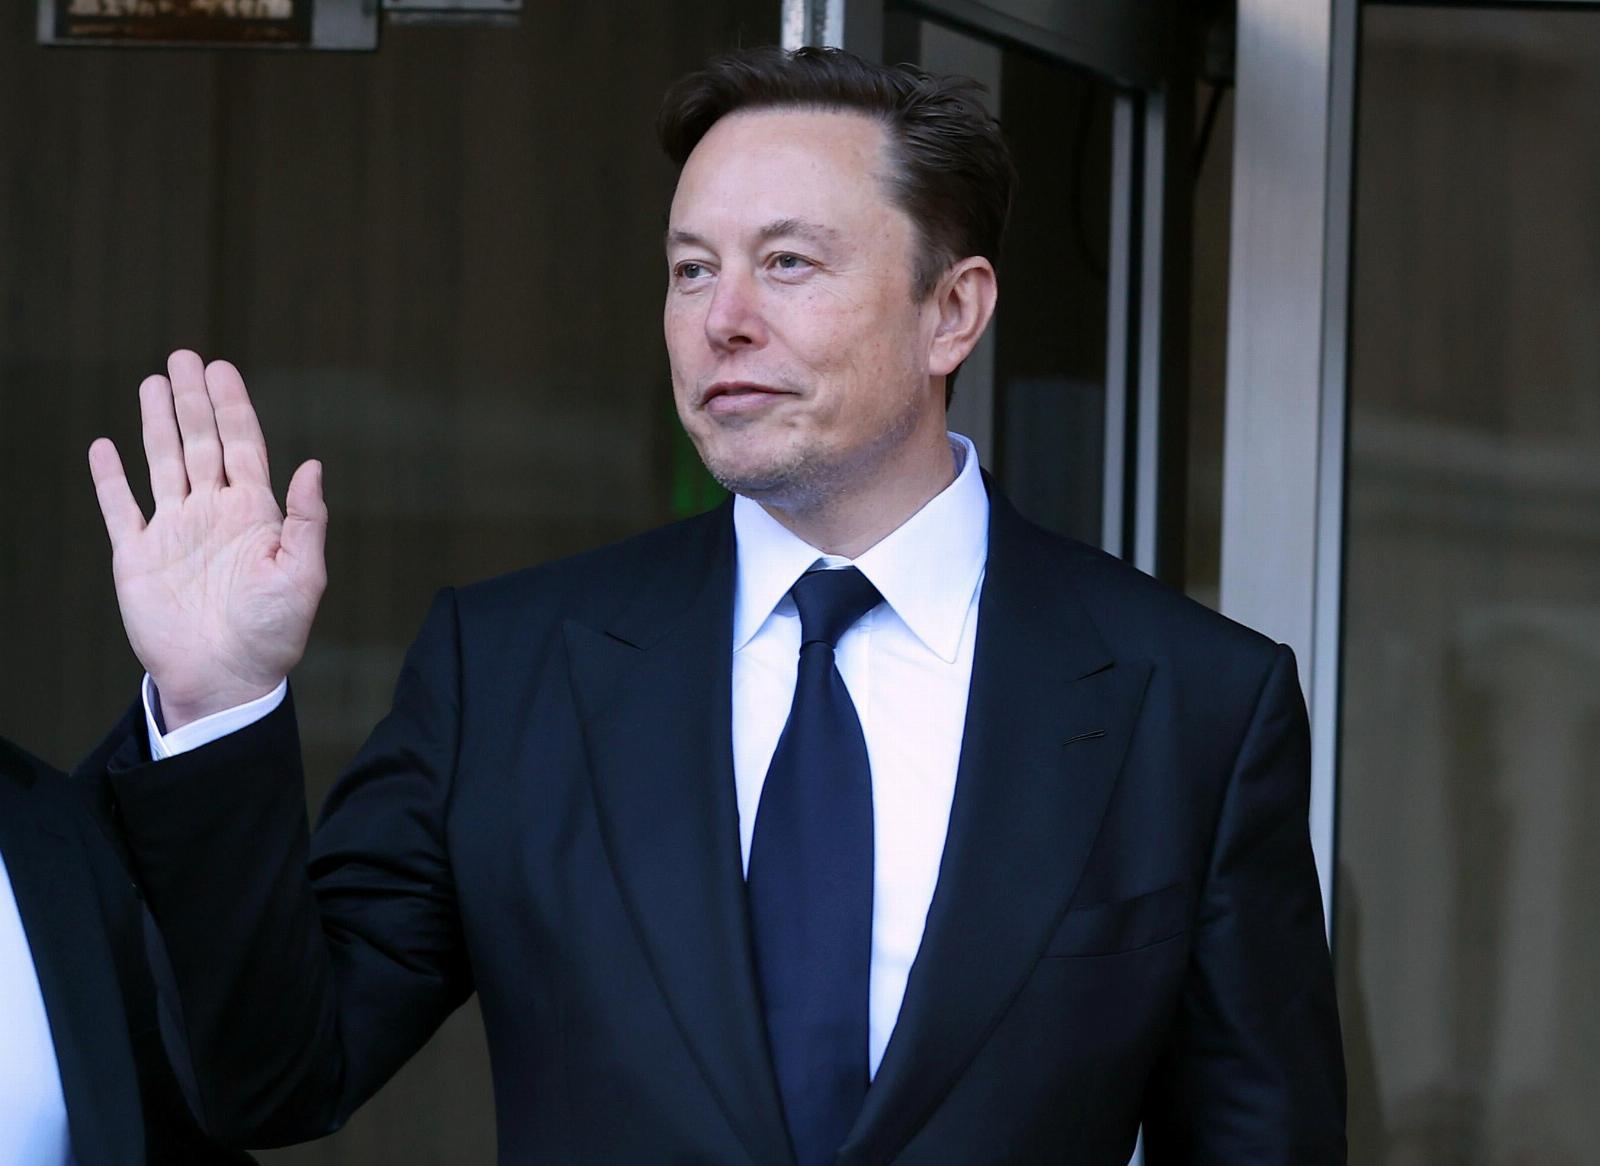 The Surprisingly Grim Warning Elon Musk Gave at an Event Meant to Boost Tesla